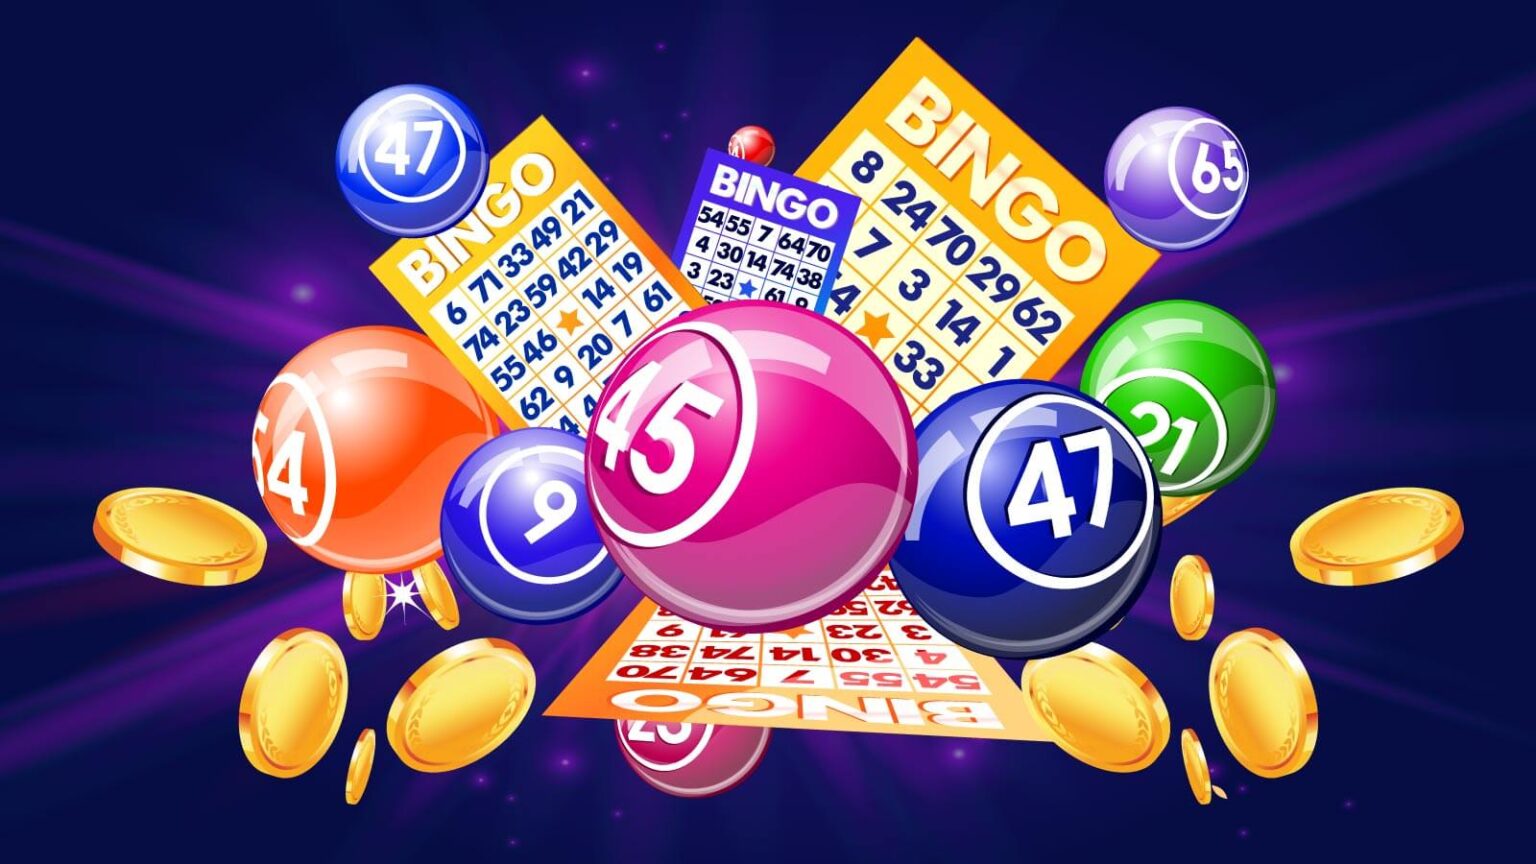 Ever thought of turning your downtime into dollars? Well, you're in luck! It's possible to make money playing bingo online, right from your couch.